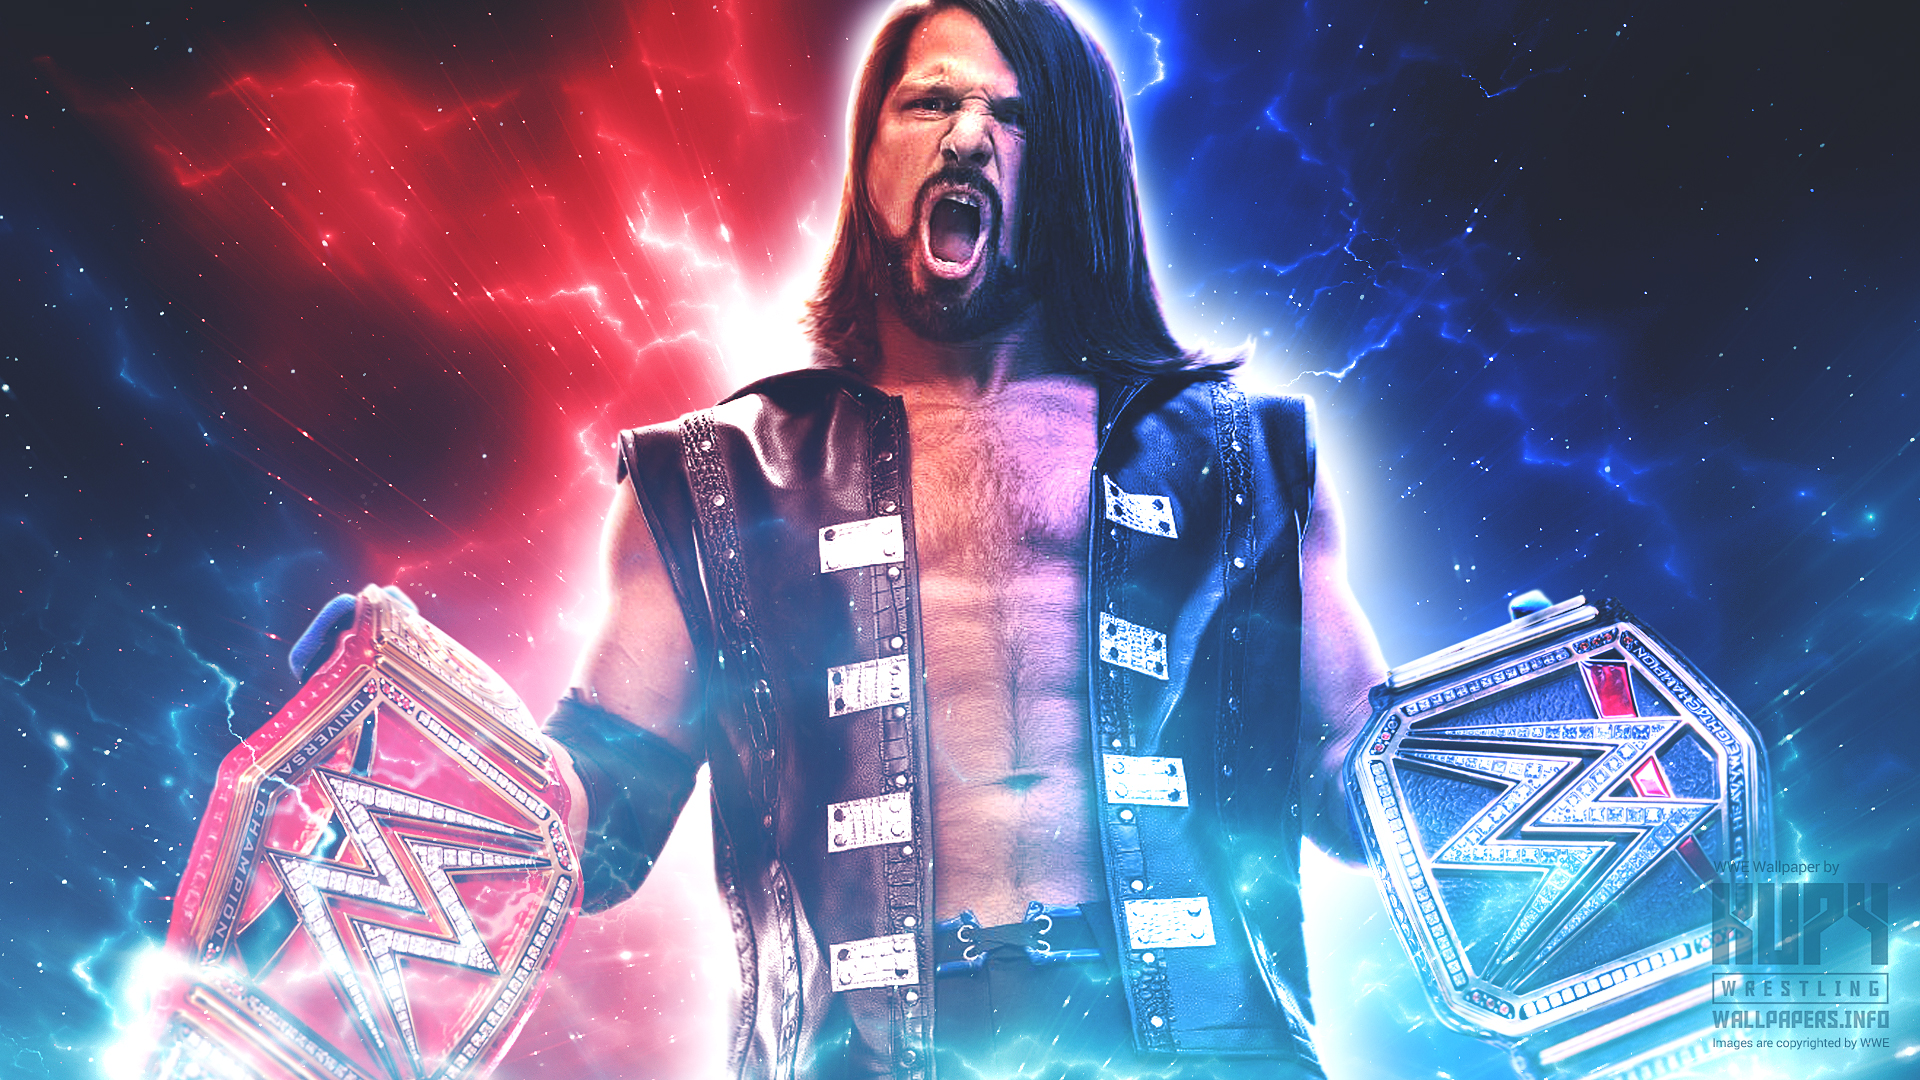 What If Aj Styles Wwe Champion And Universal Wallpaper